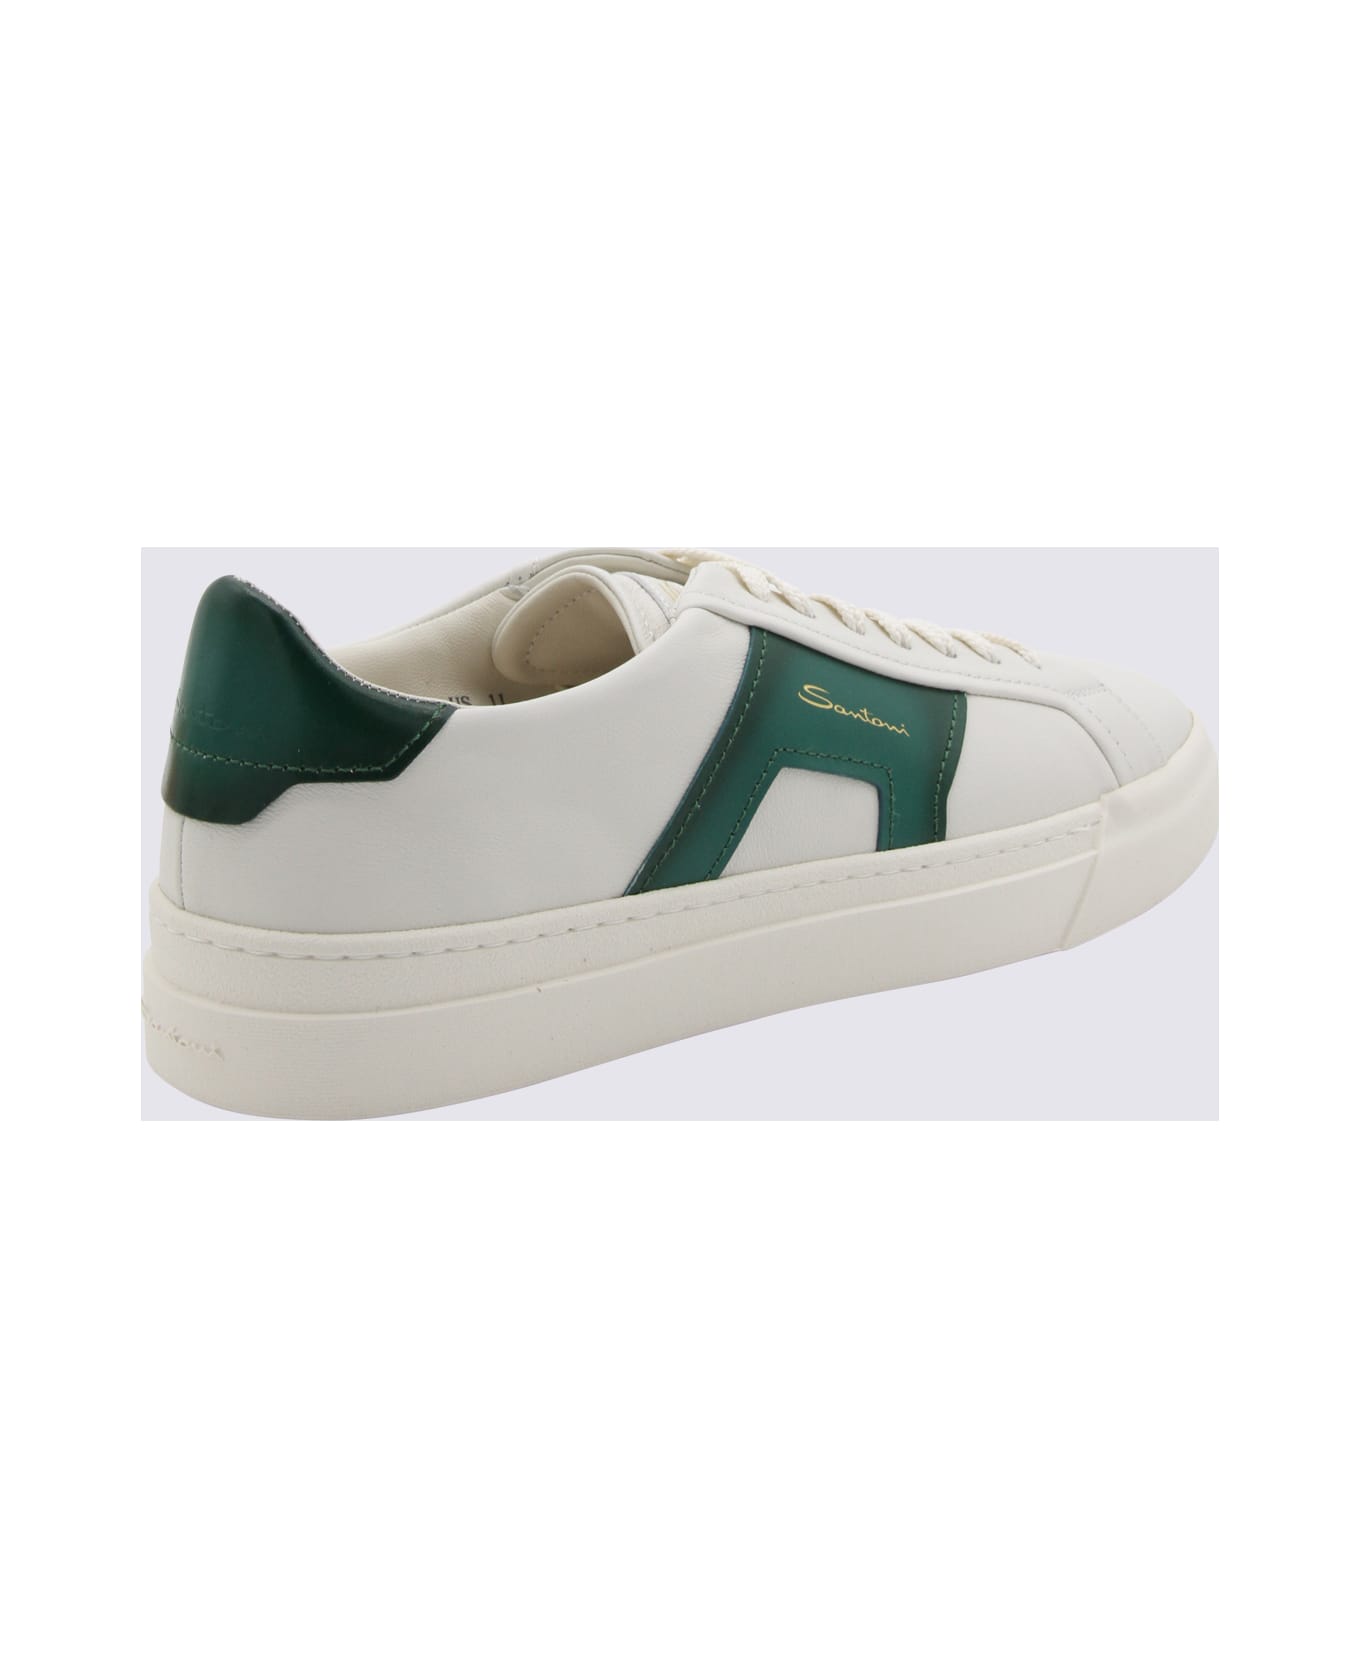 Santoni White And Green Leather Sneakers | italist